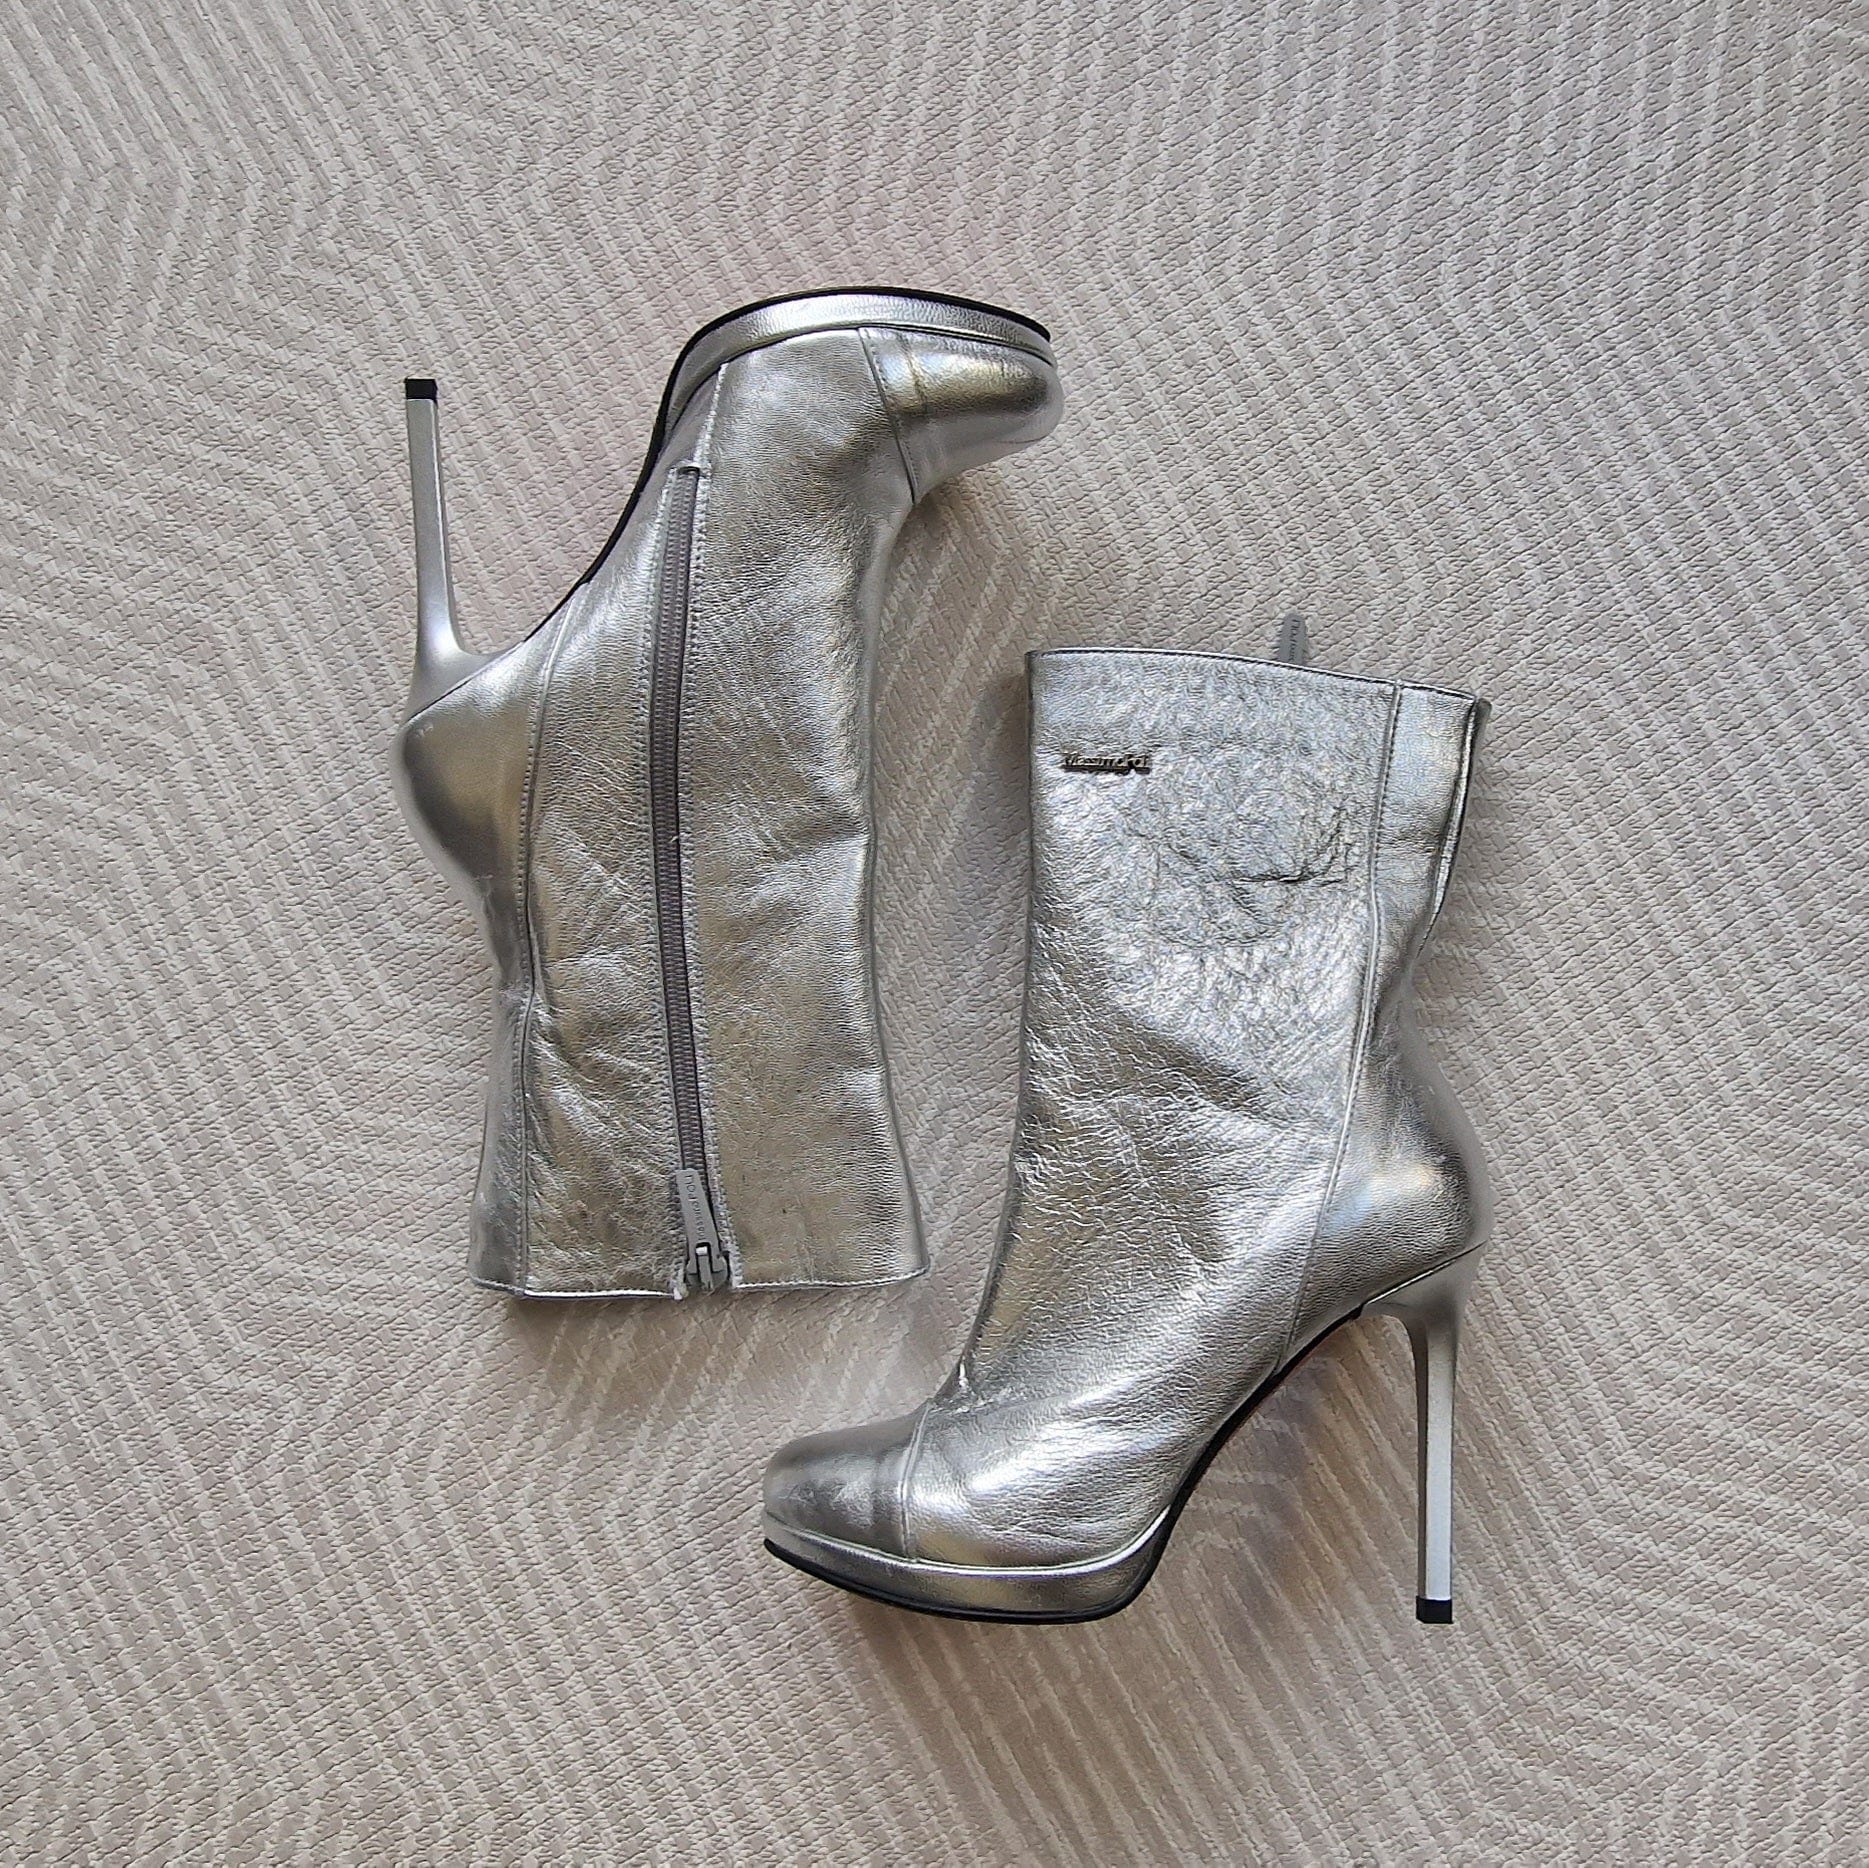 High heel platform boots in silver leather